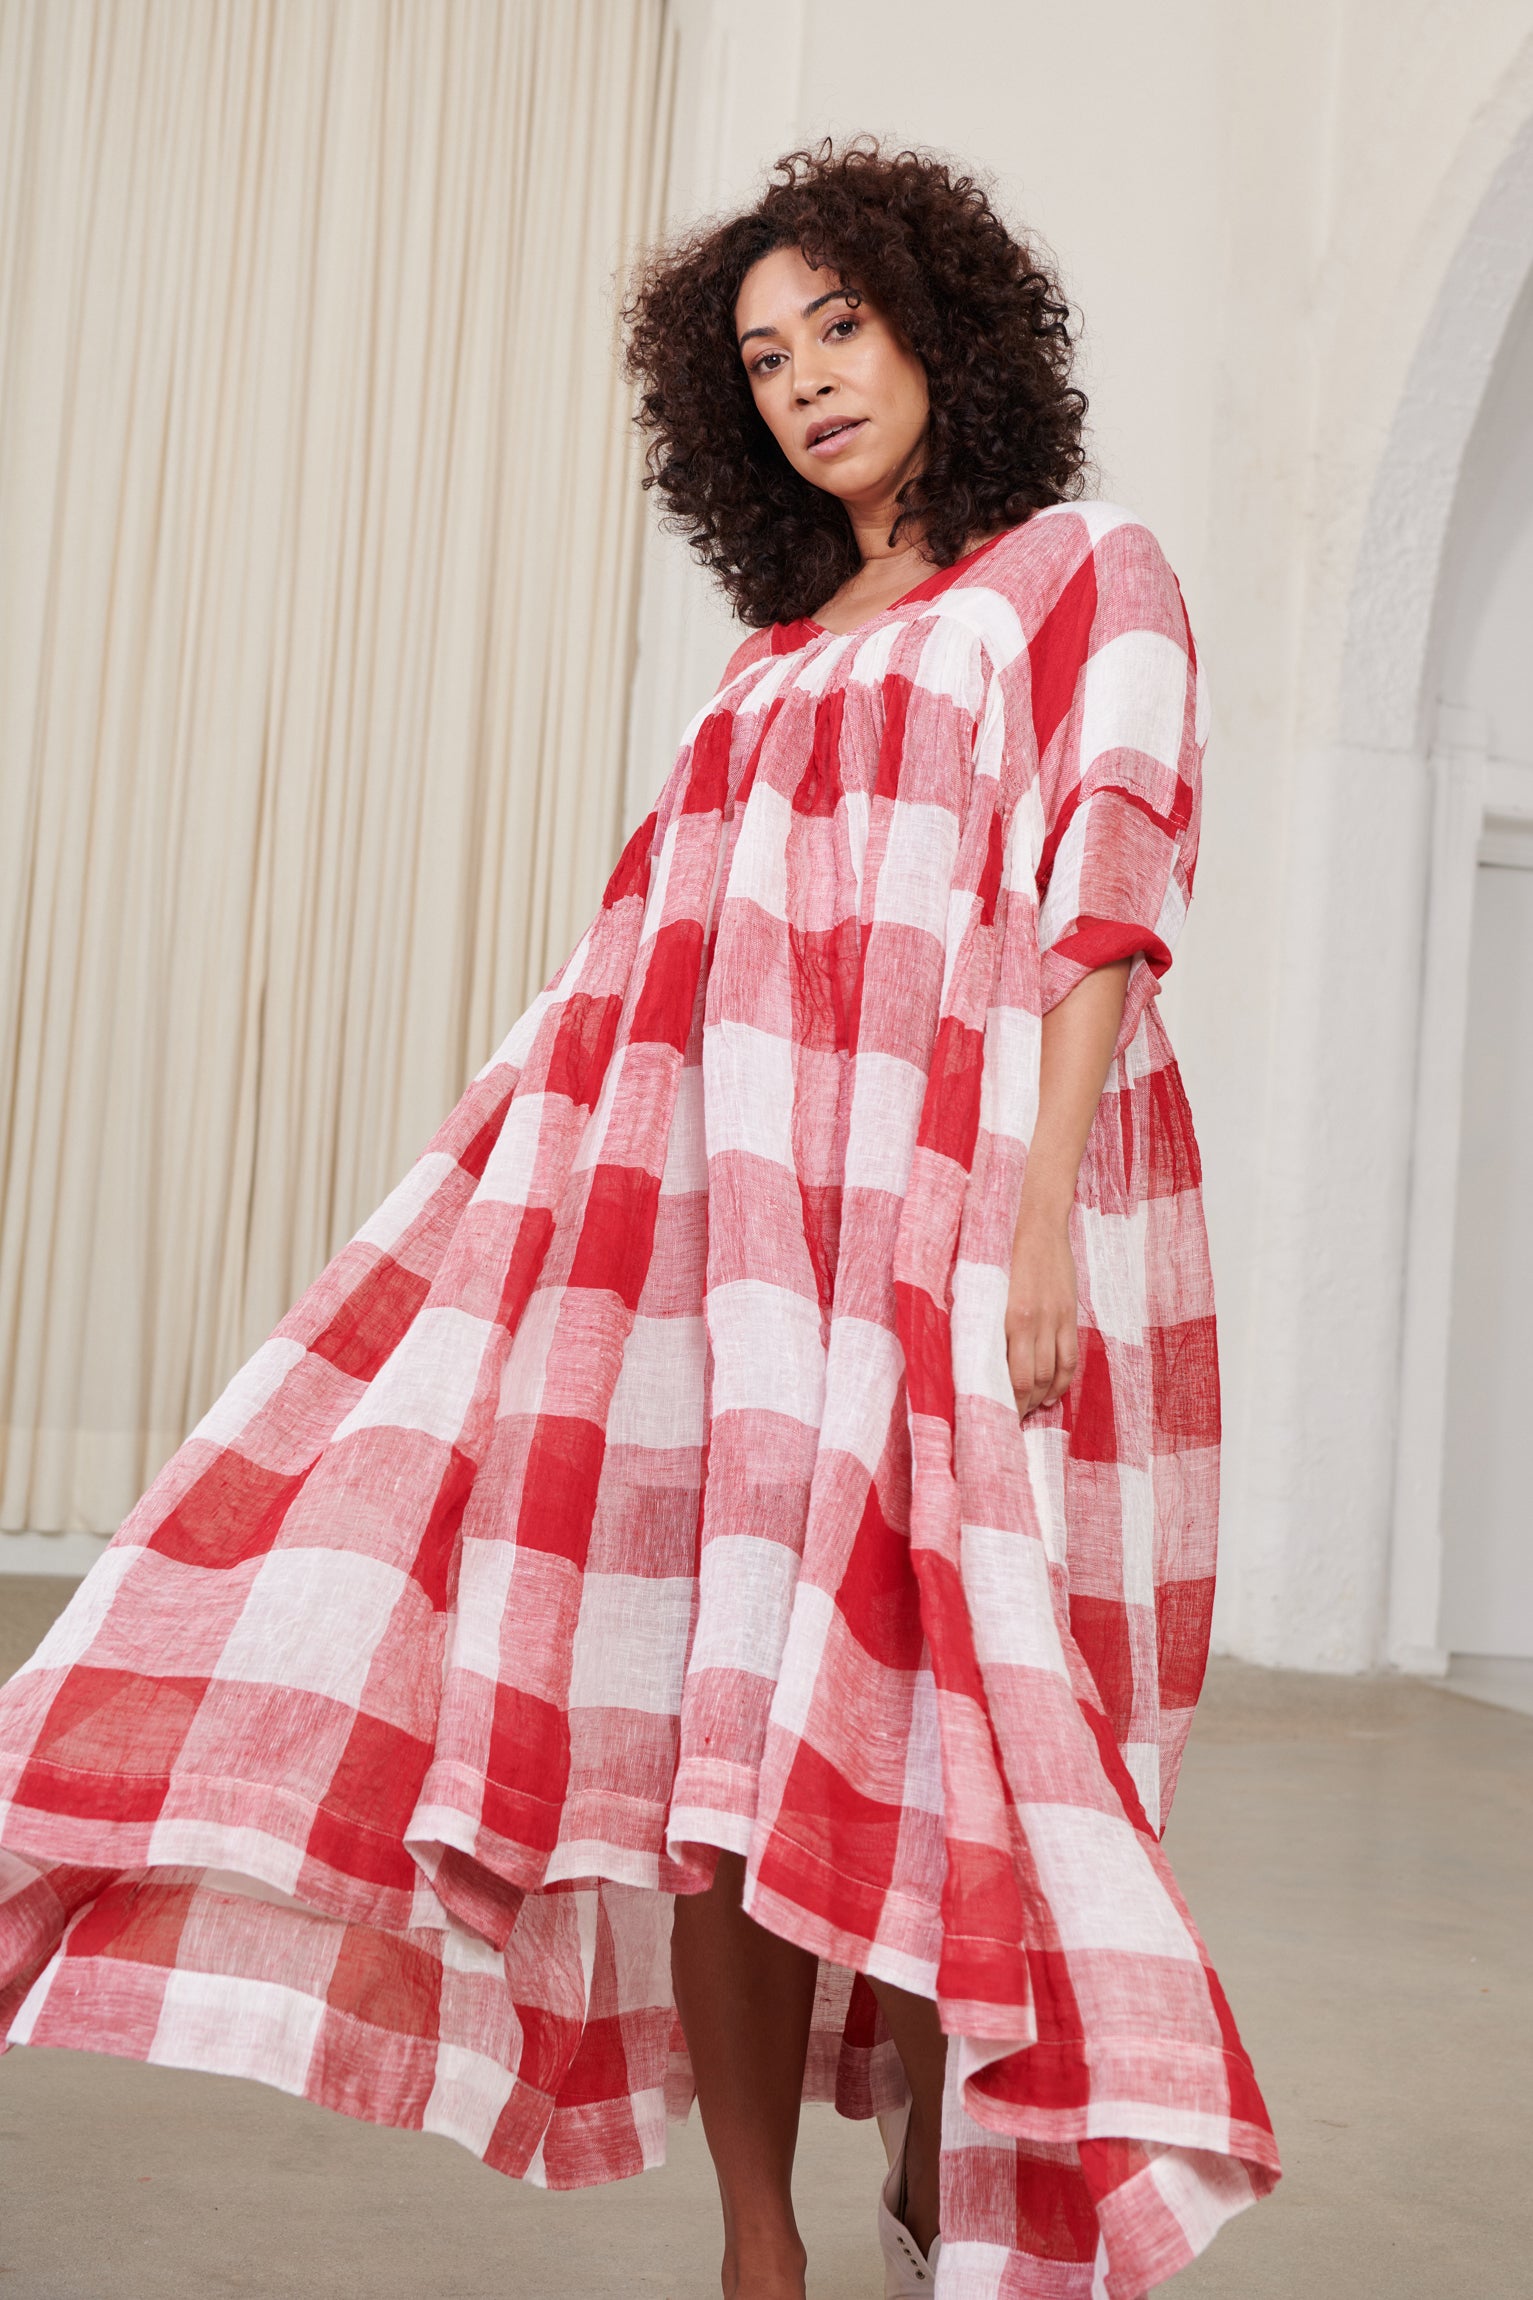 A MegbyDesign model is wearing a red and white gingham soft gauze linen tunic dress